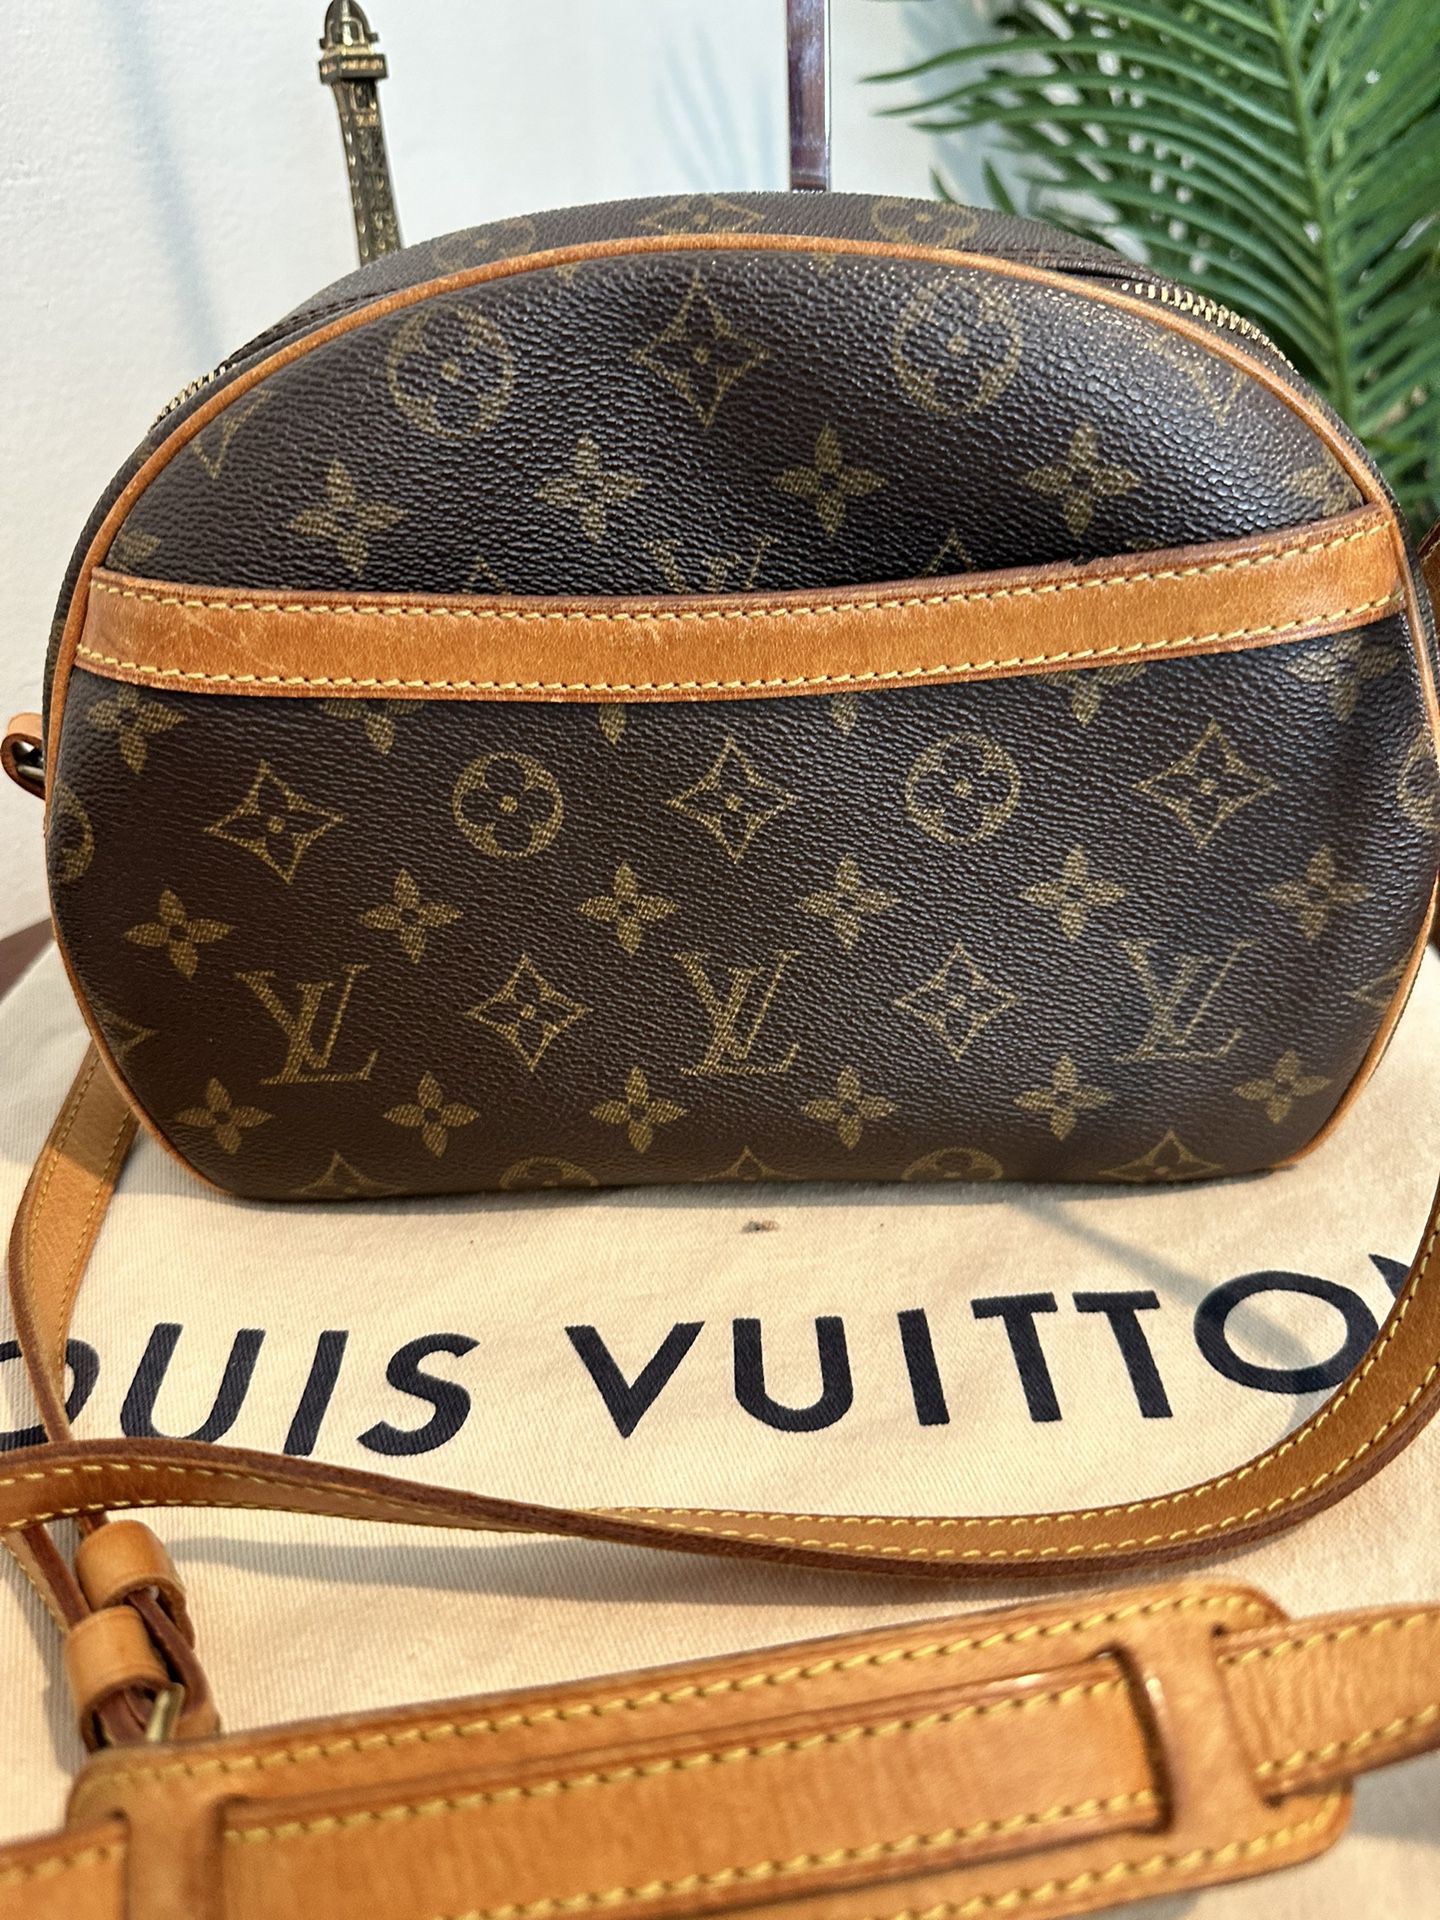 LV Bag for Sale in Los Angeles, CA - OfferUp